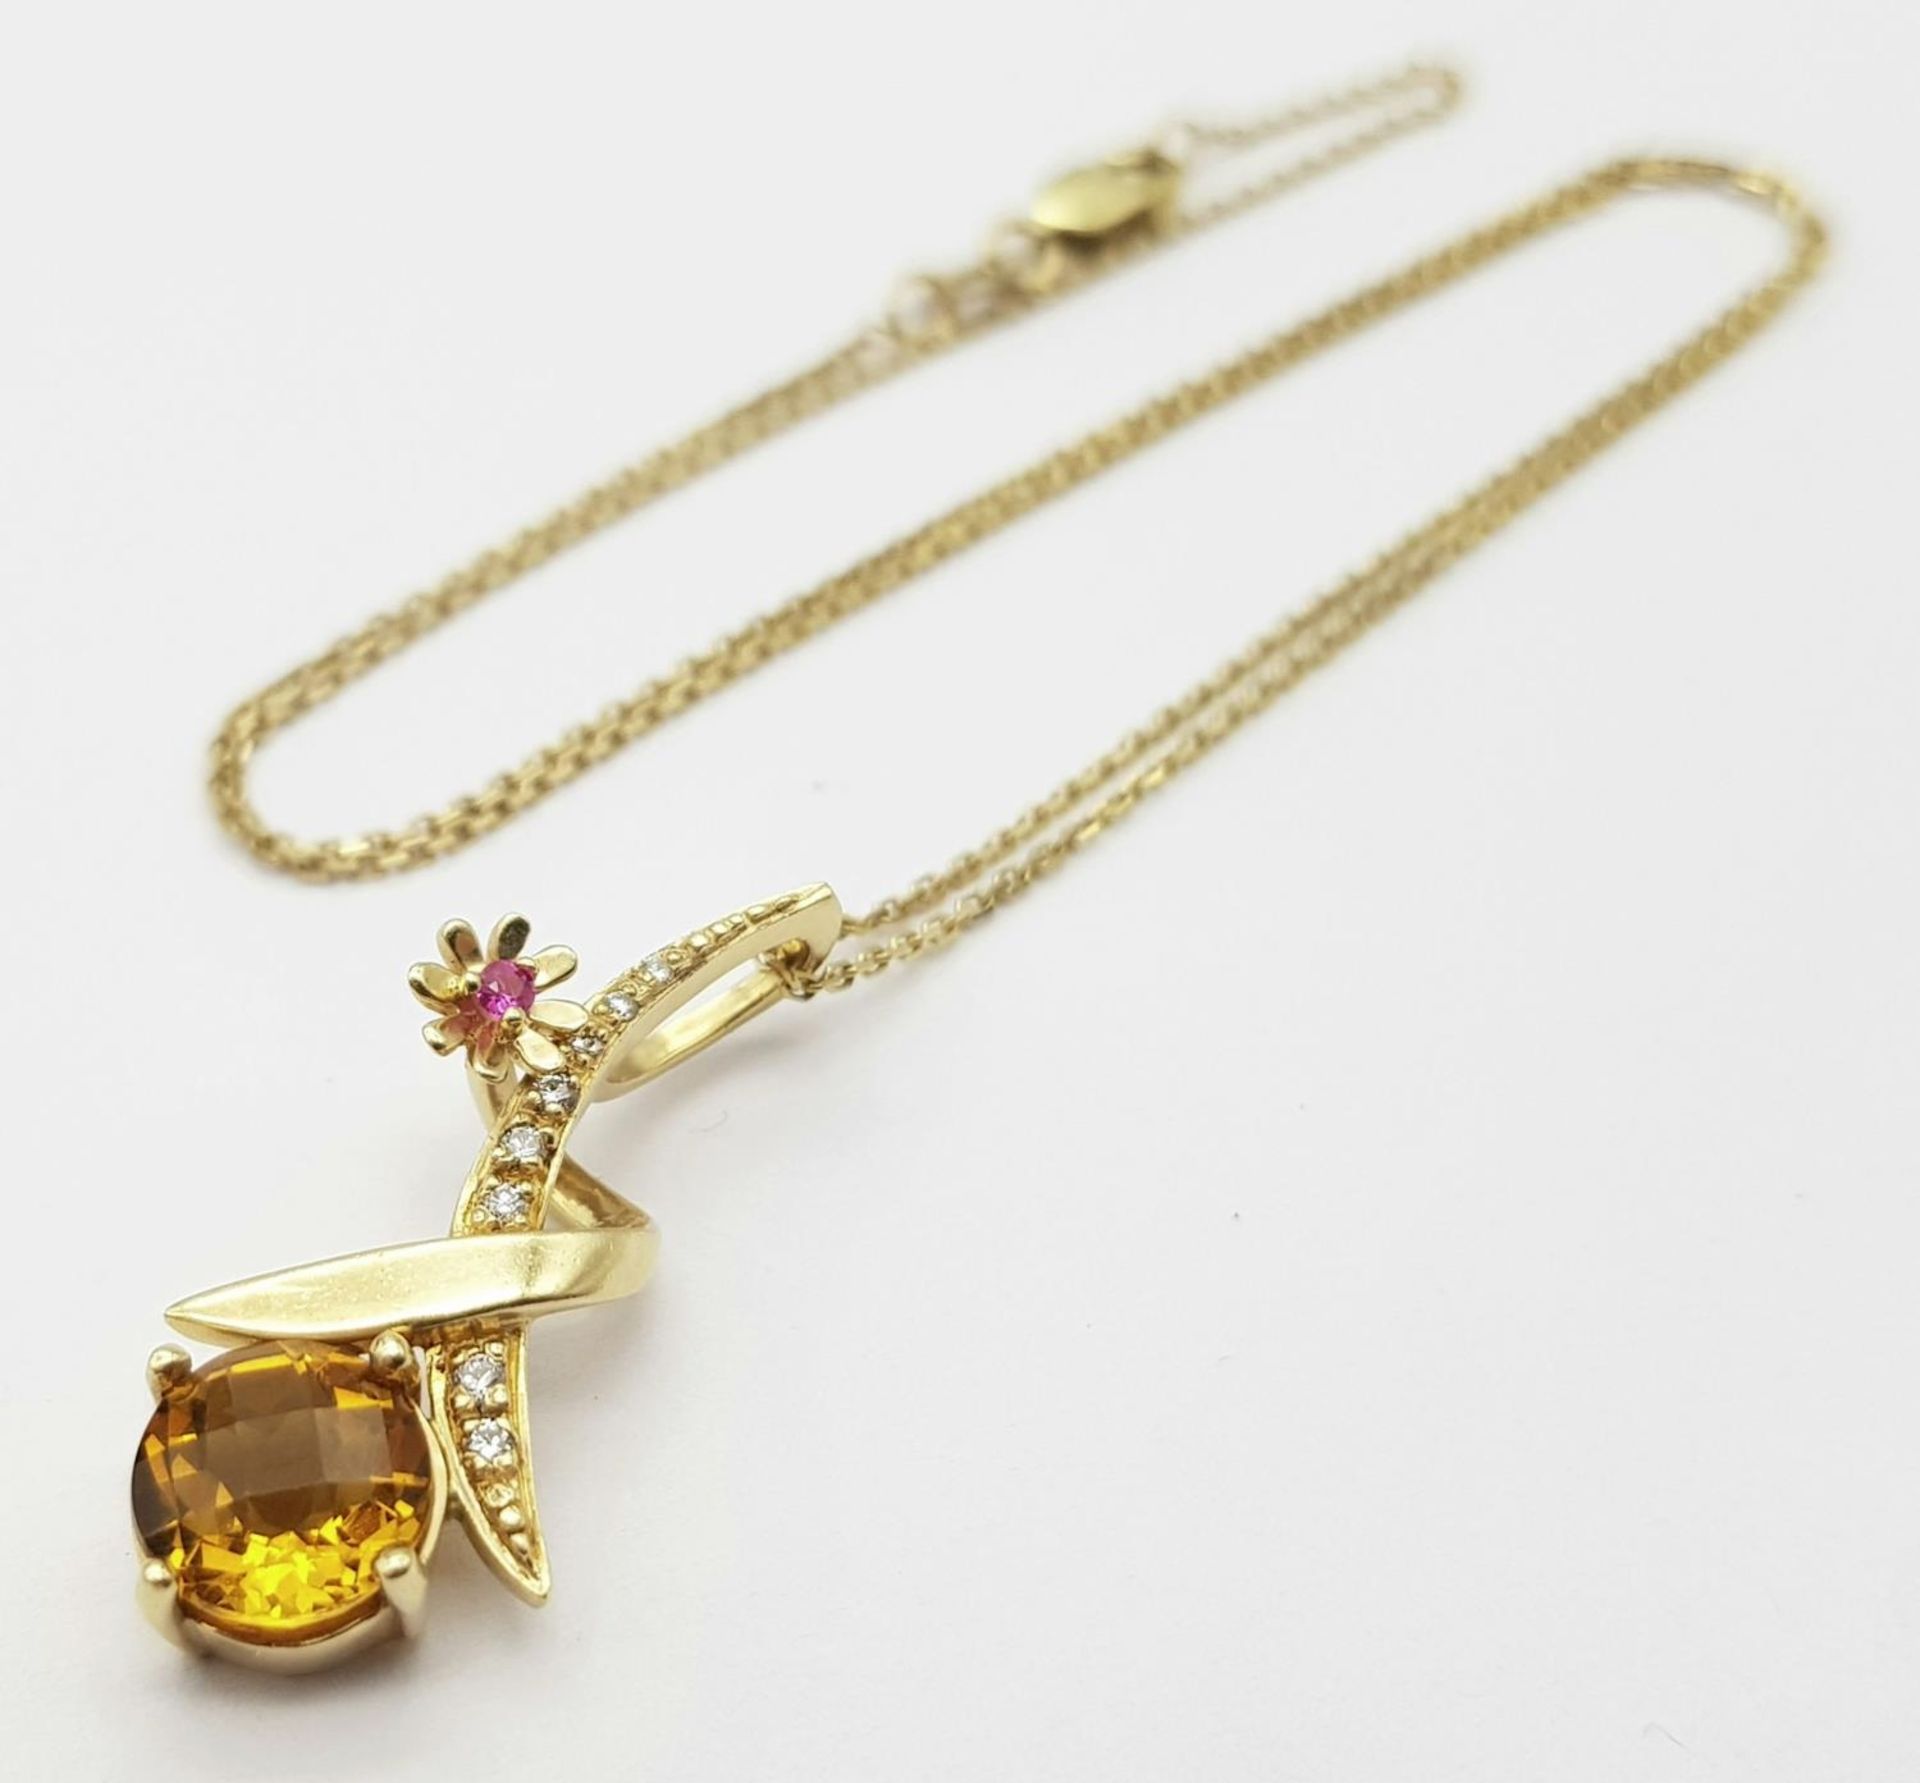 A 14K YELLOW GOLD CITRINE & DIAMOND CROSSOVER PENDANT ON CHAIN 4.7G , 41cm chain length , 27mm x - Image 2 of 6